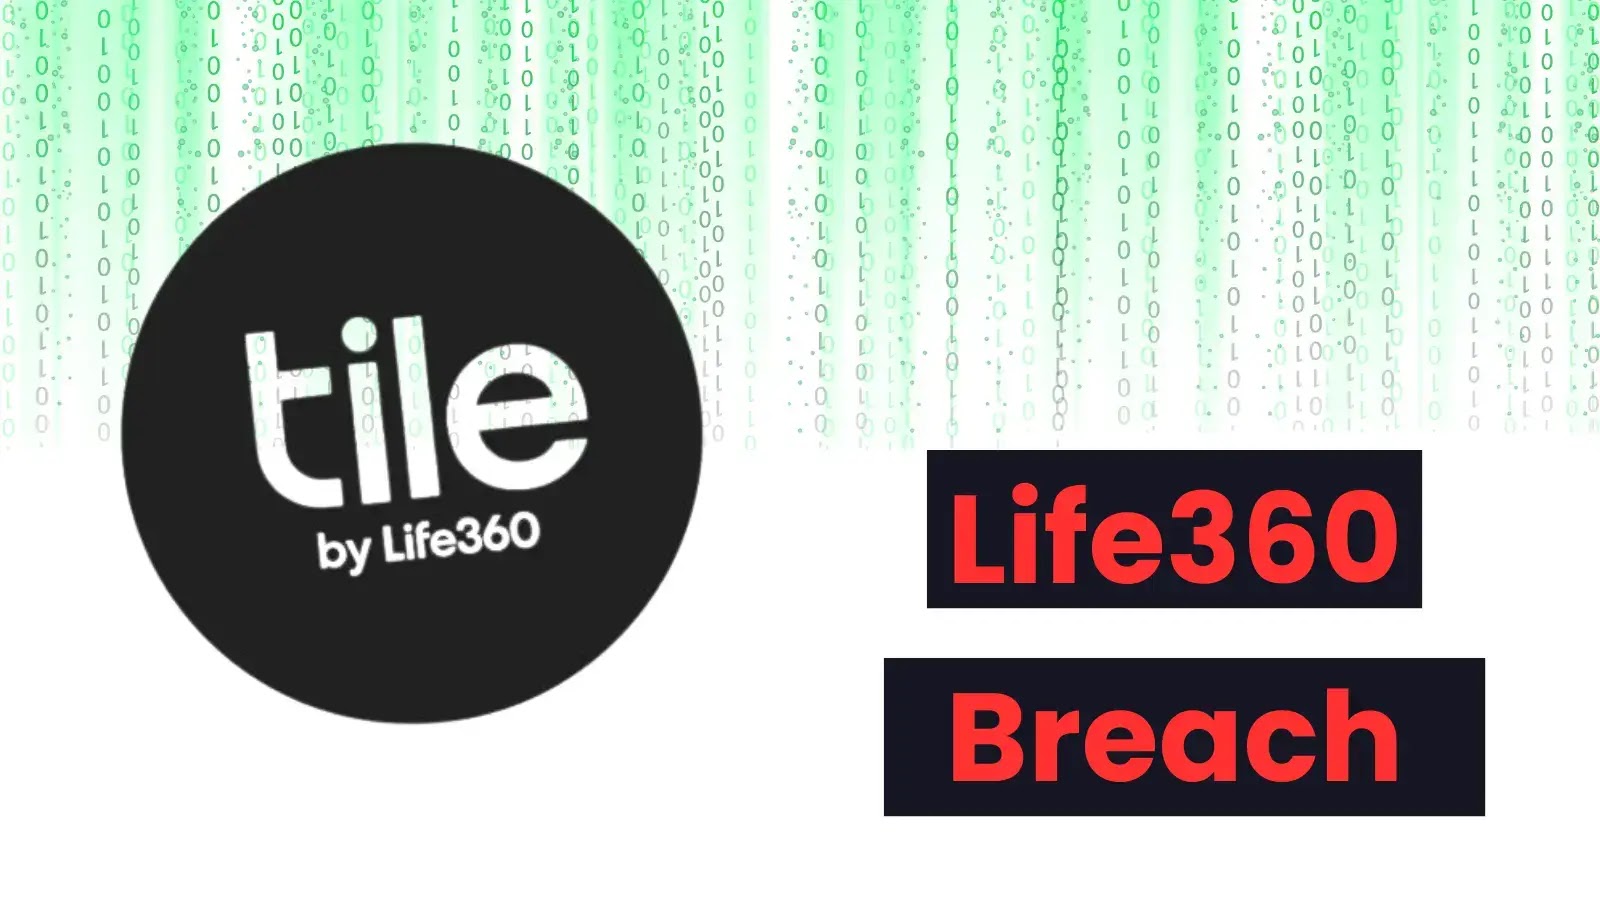 Life360 Breach: Hackers Accessed the Tile Customer Support Platform